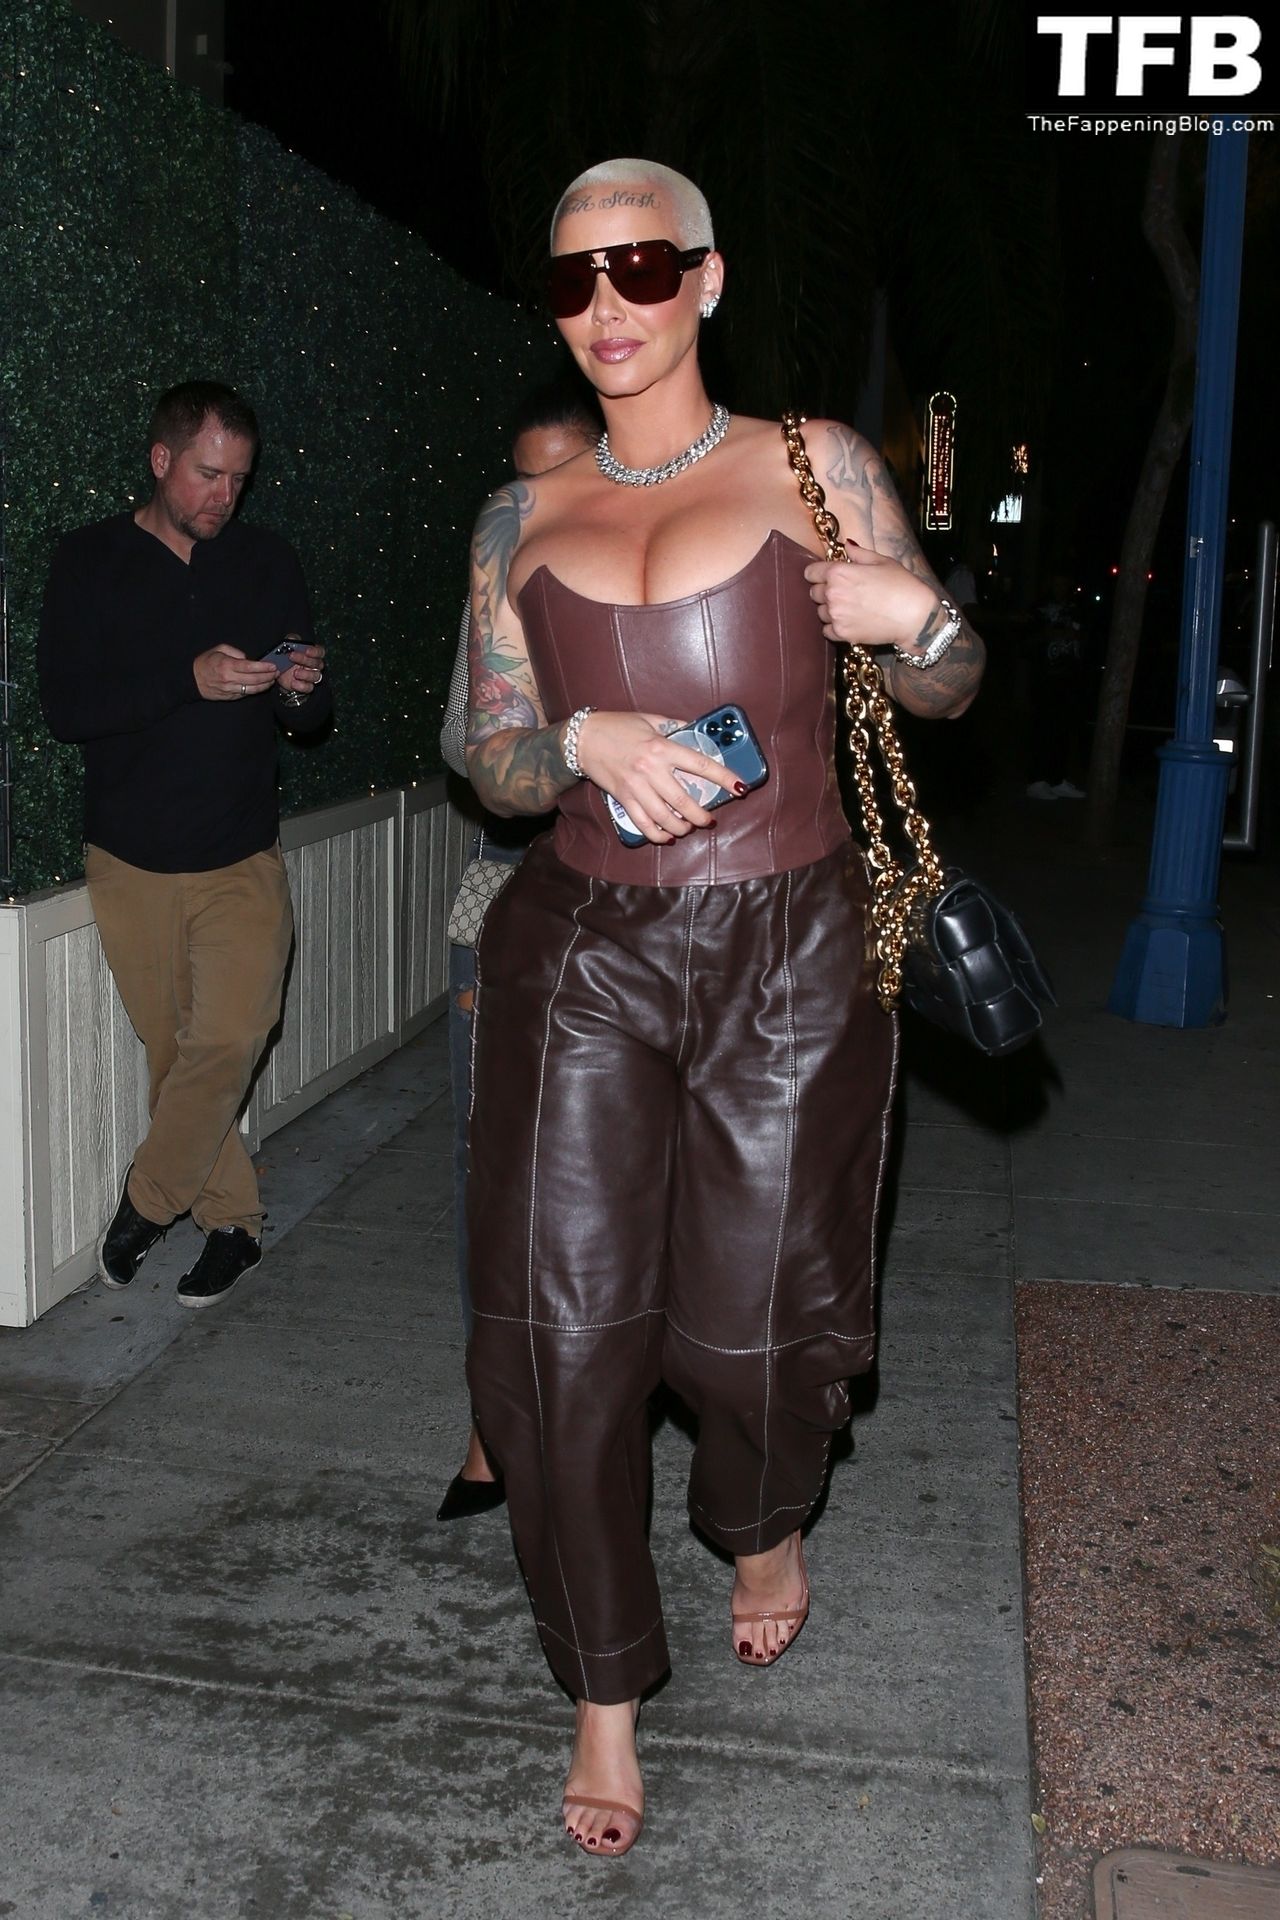 Amber-Rose-Sexy-The-Fappening-Blog-72.jpg